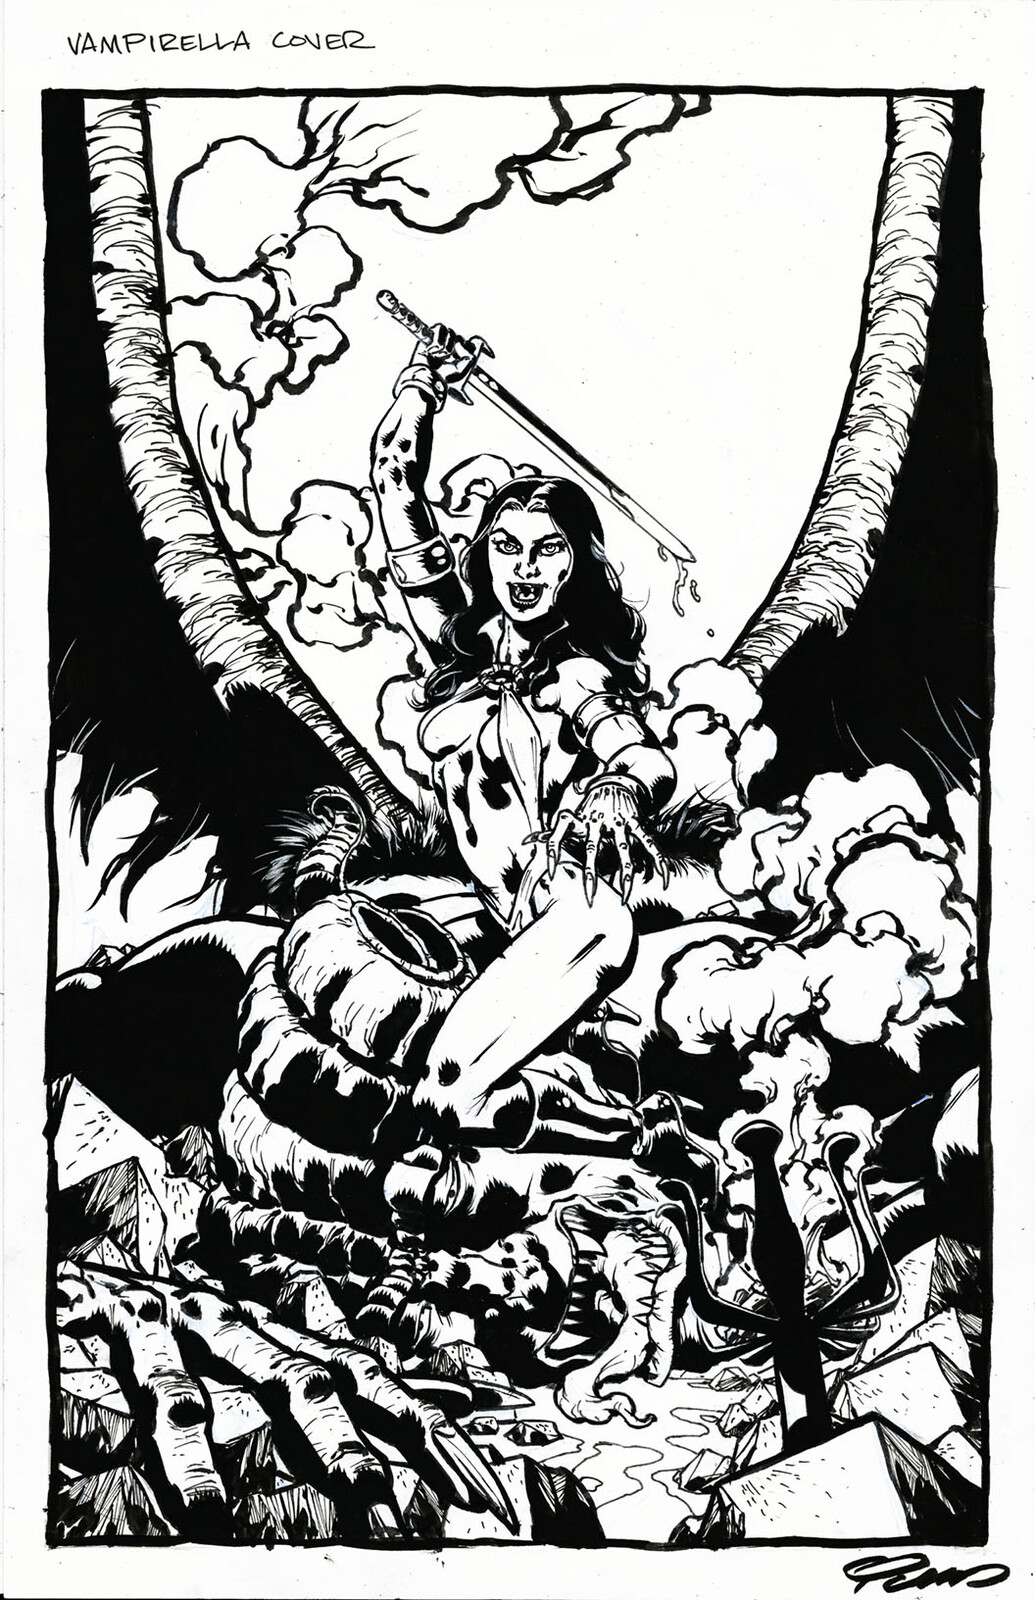 Original line art for the cover to Vampirella #25 published by Dynamite Comics. 